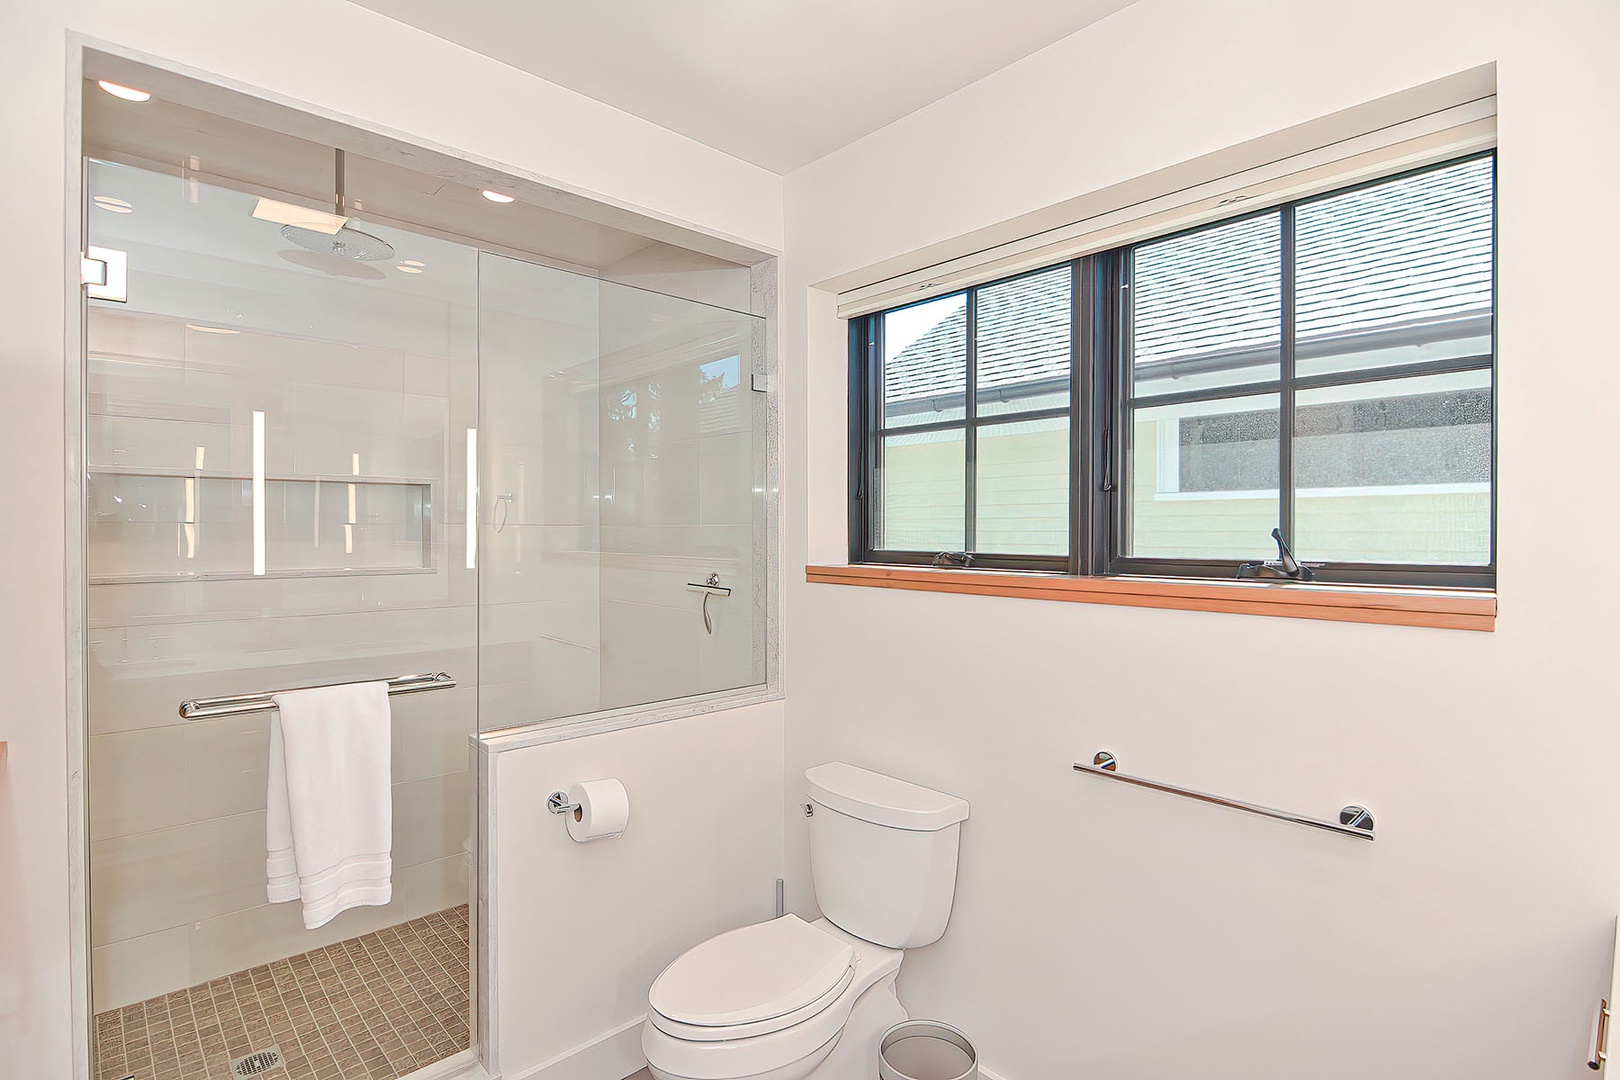 The full bath has a gorgeous tiled walk-in shower with a rain shower head.